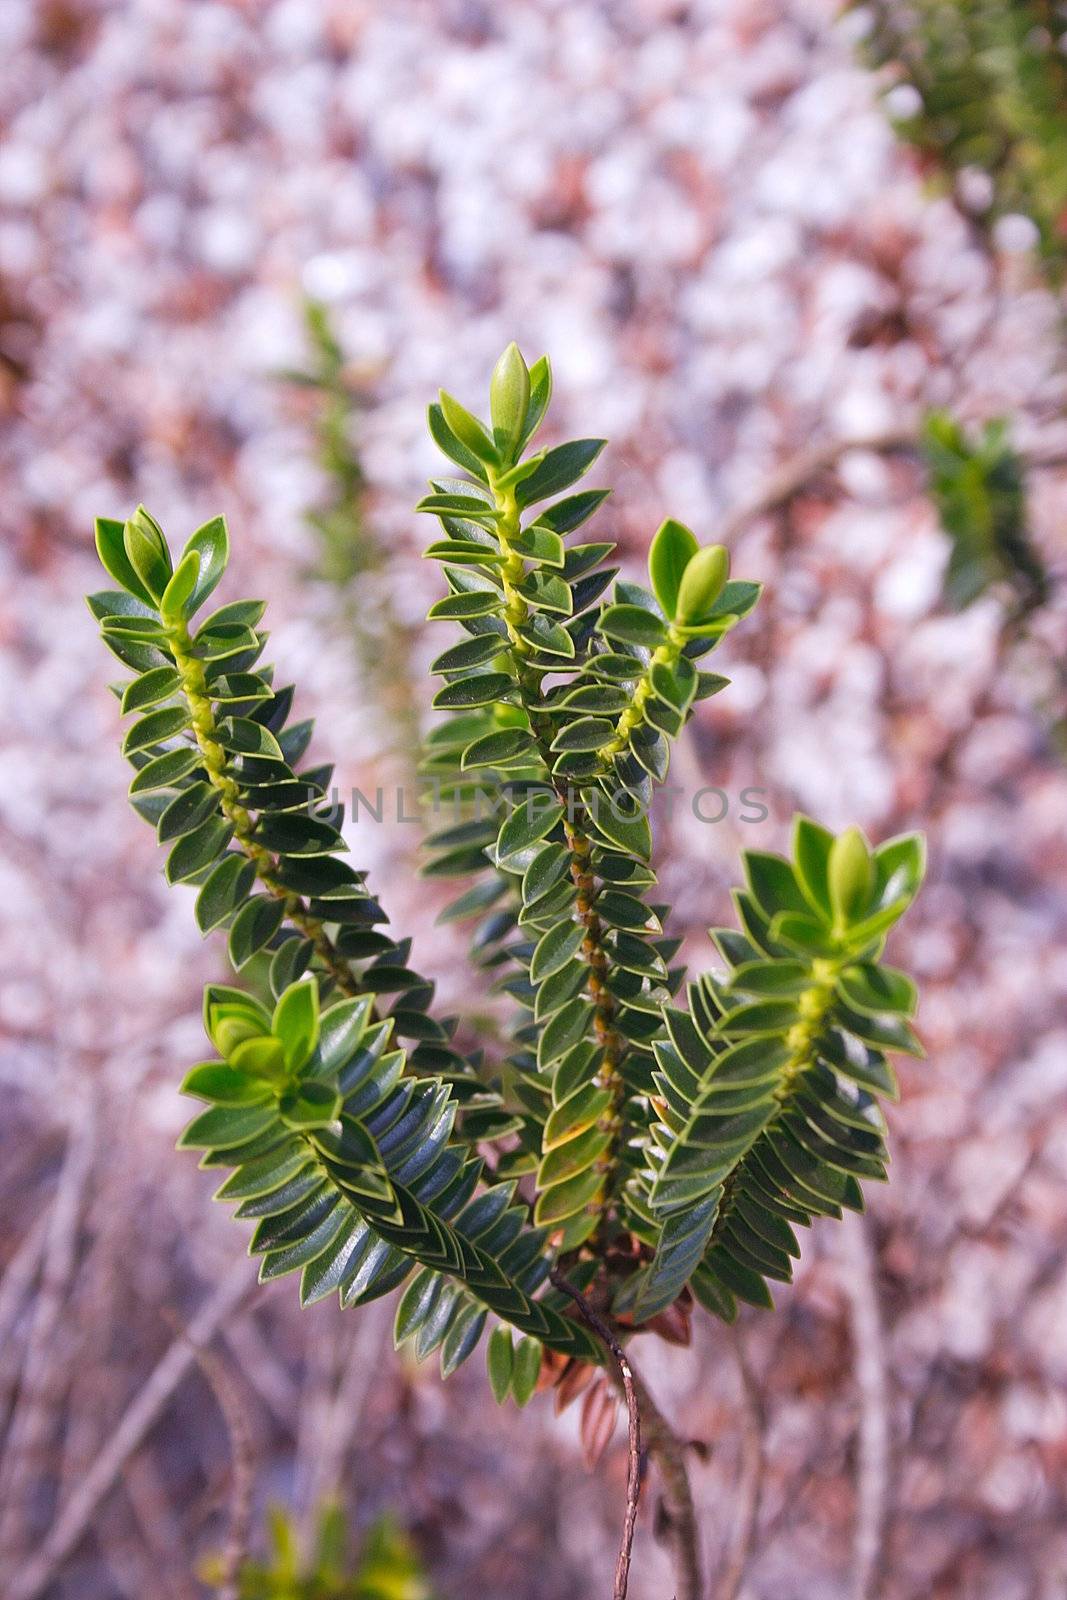 detail of leaves on a young shrub by leafy